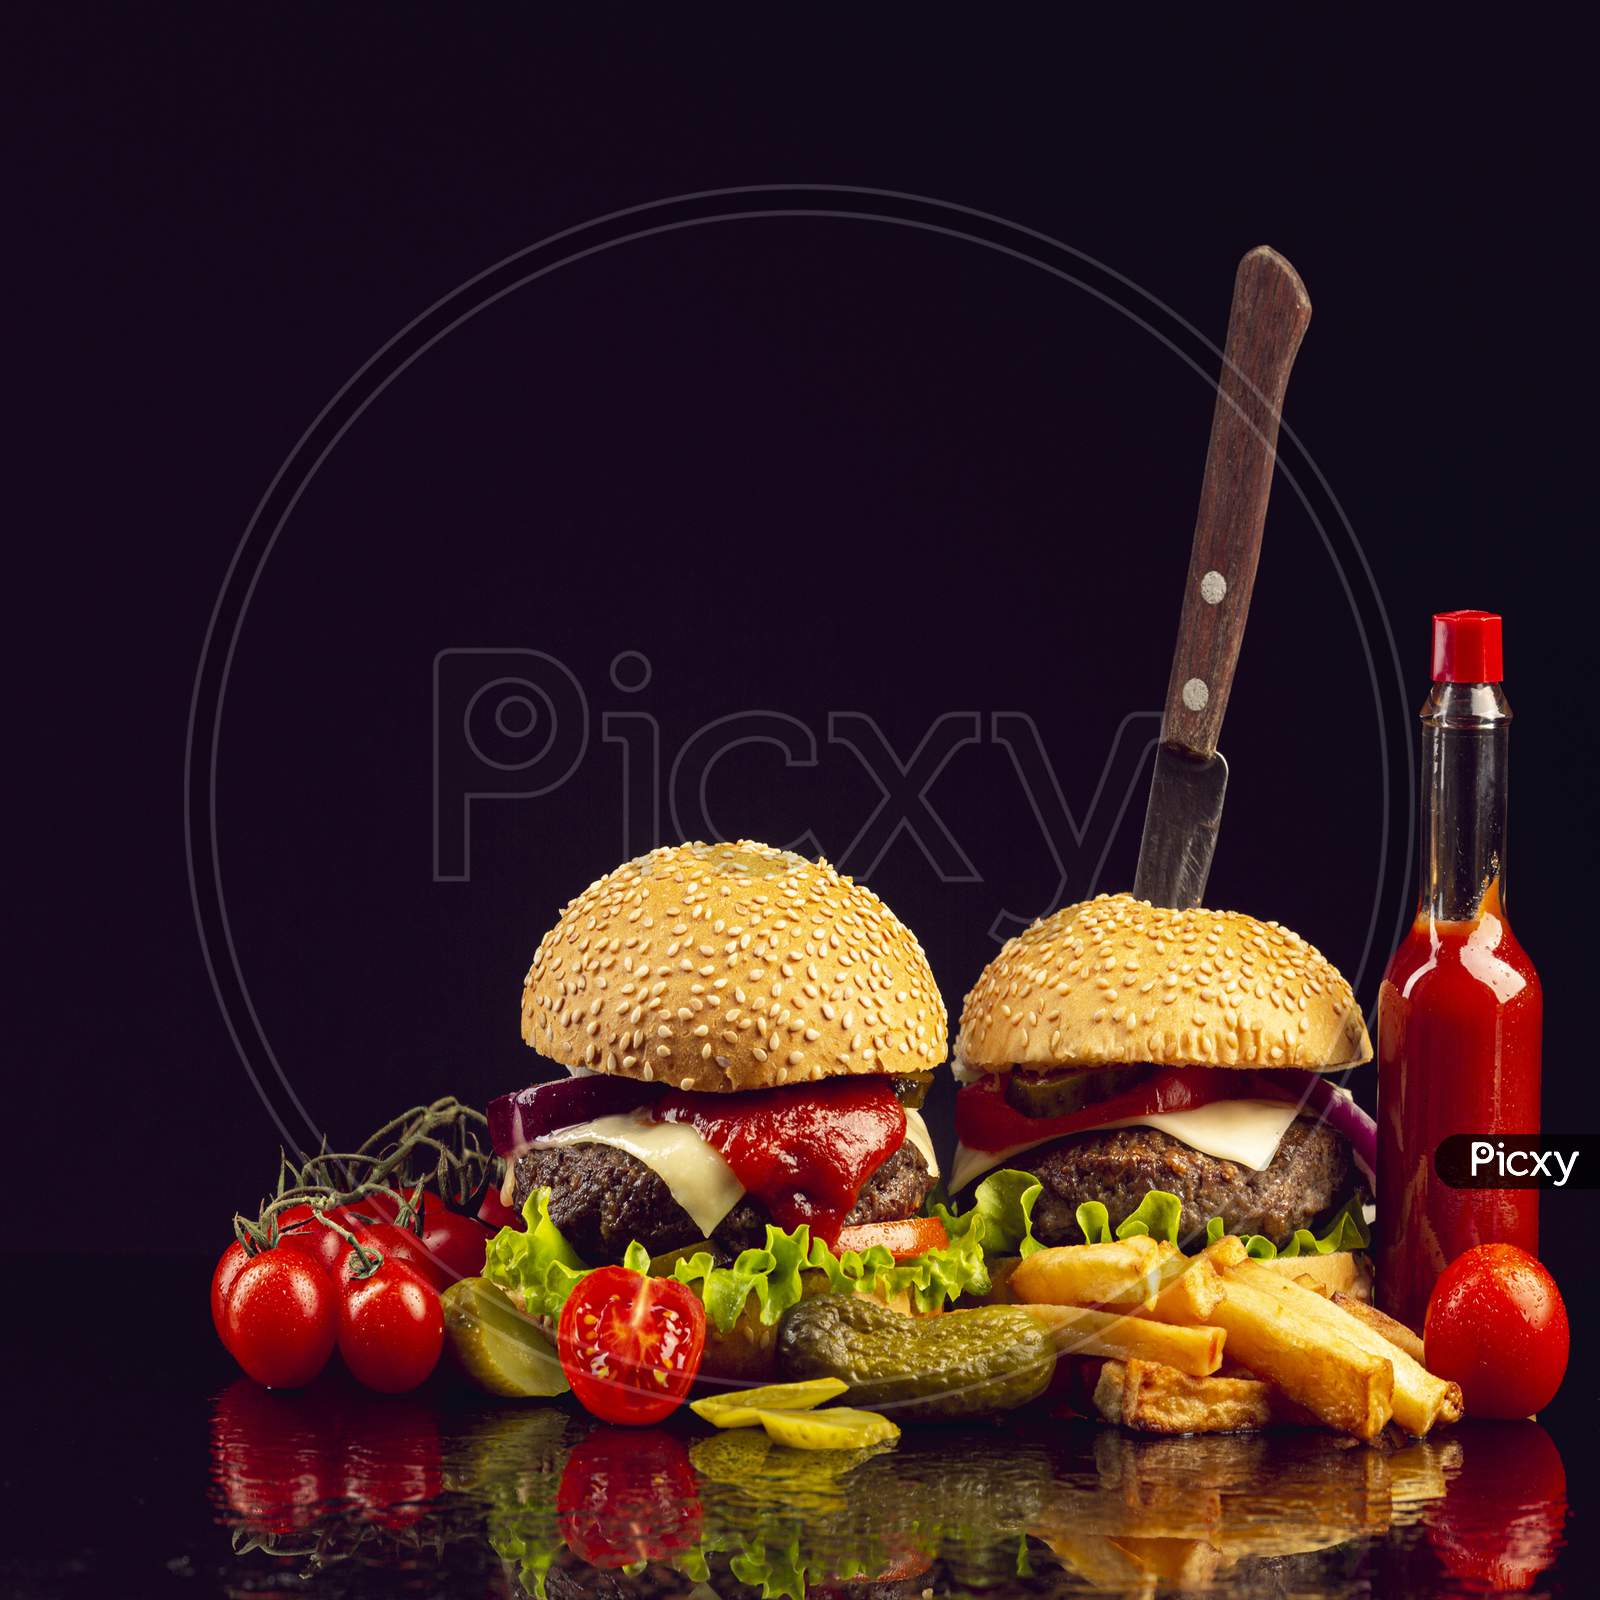 Hamburger Meal Served With French Fries And Soda Close-Up. Fast Food & Barbecue Collection.